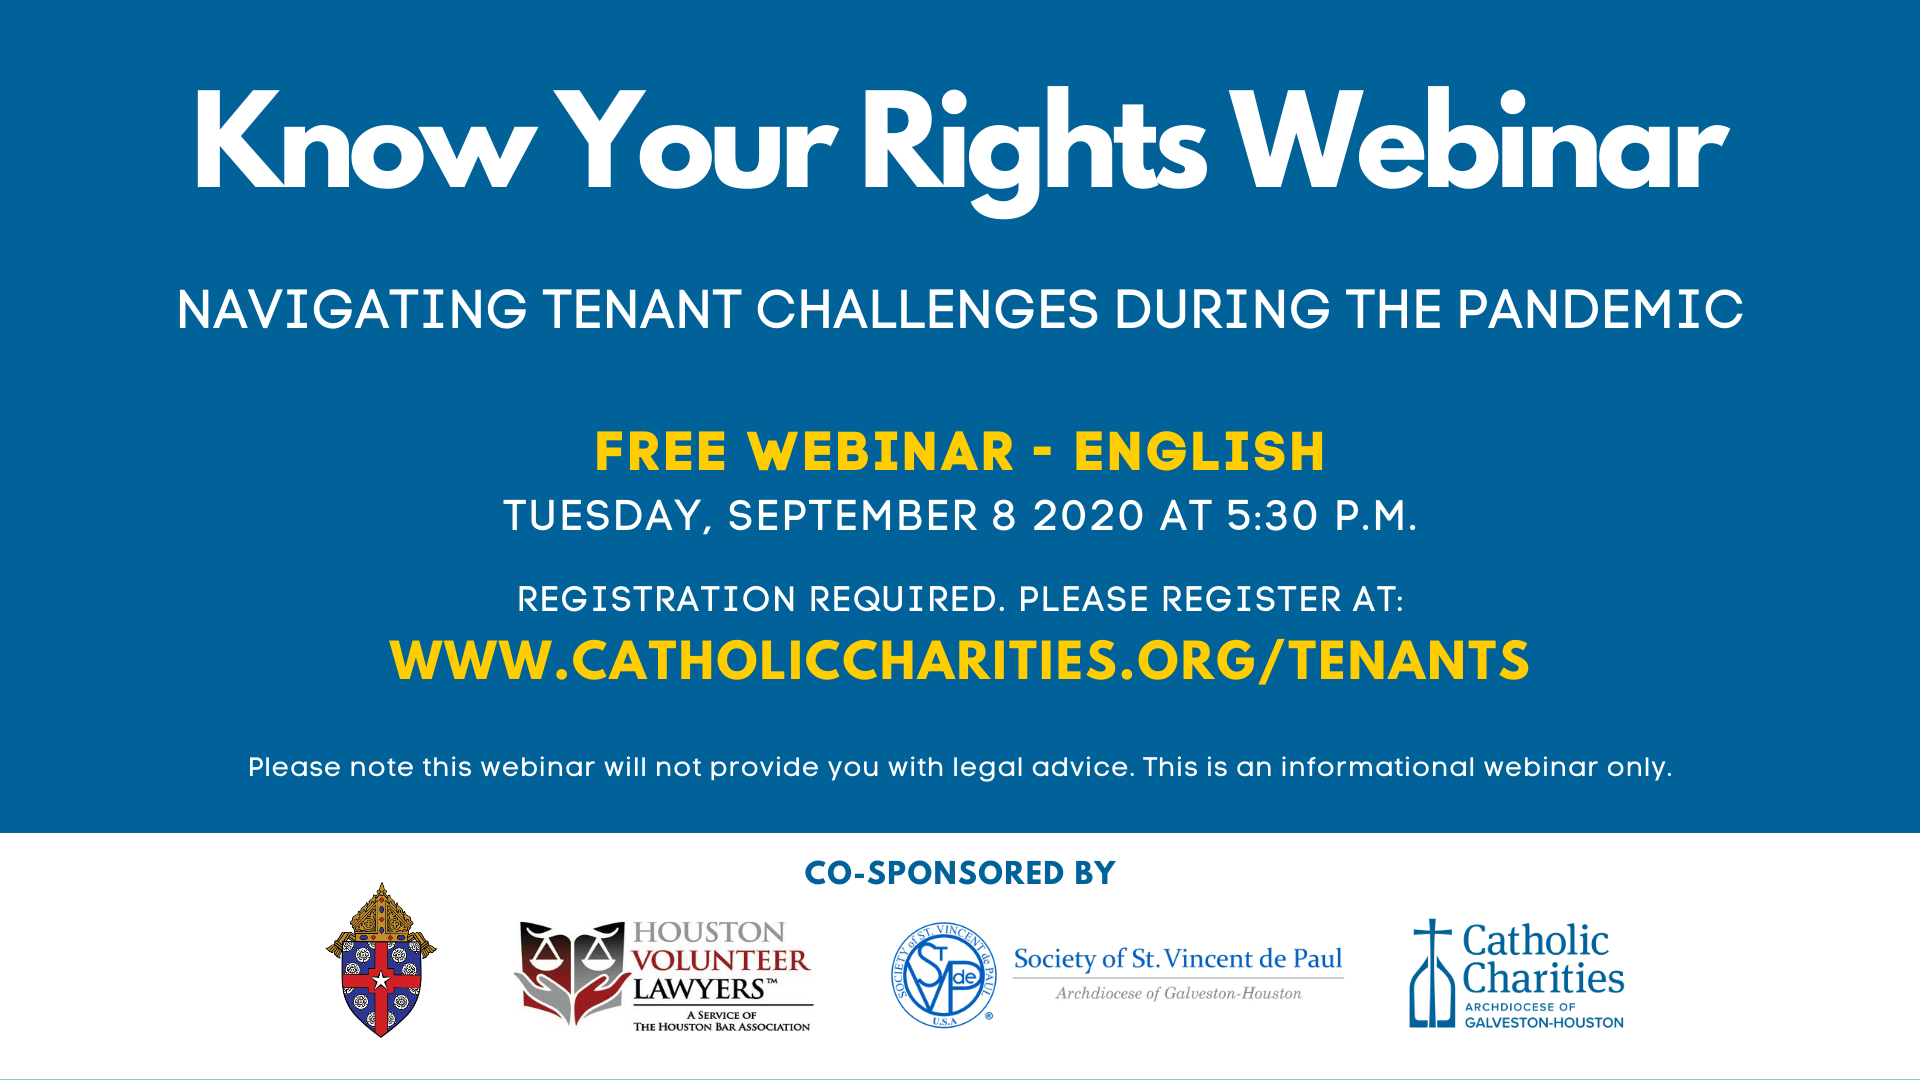 Know Your Rights Webinar